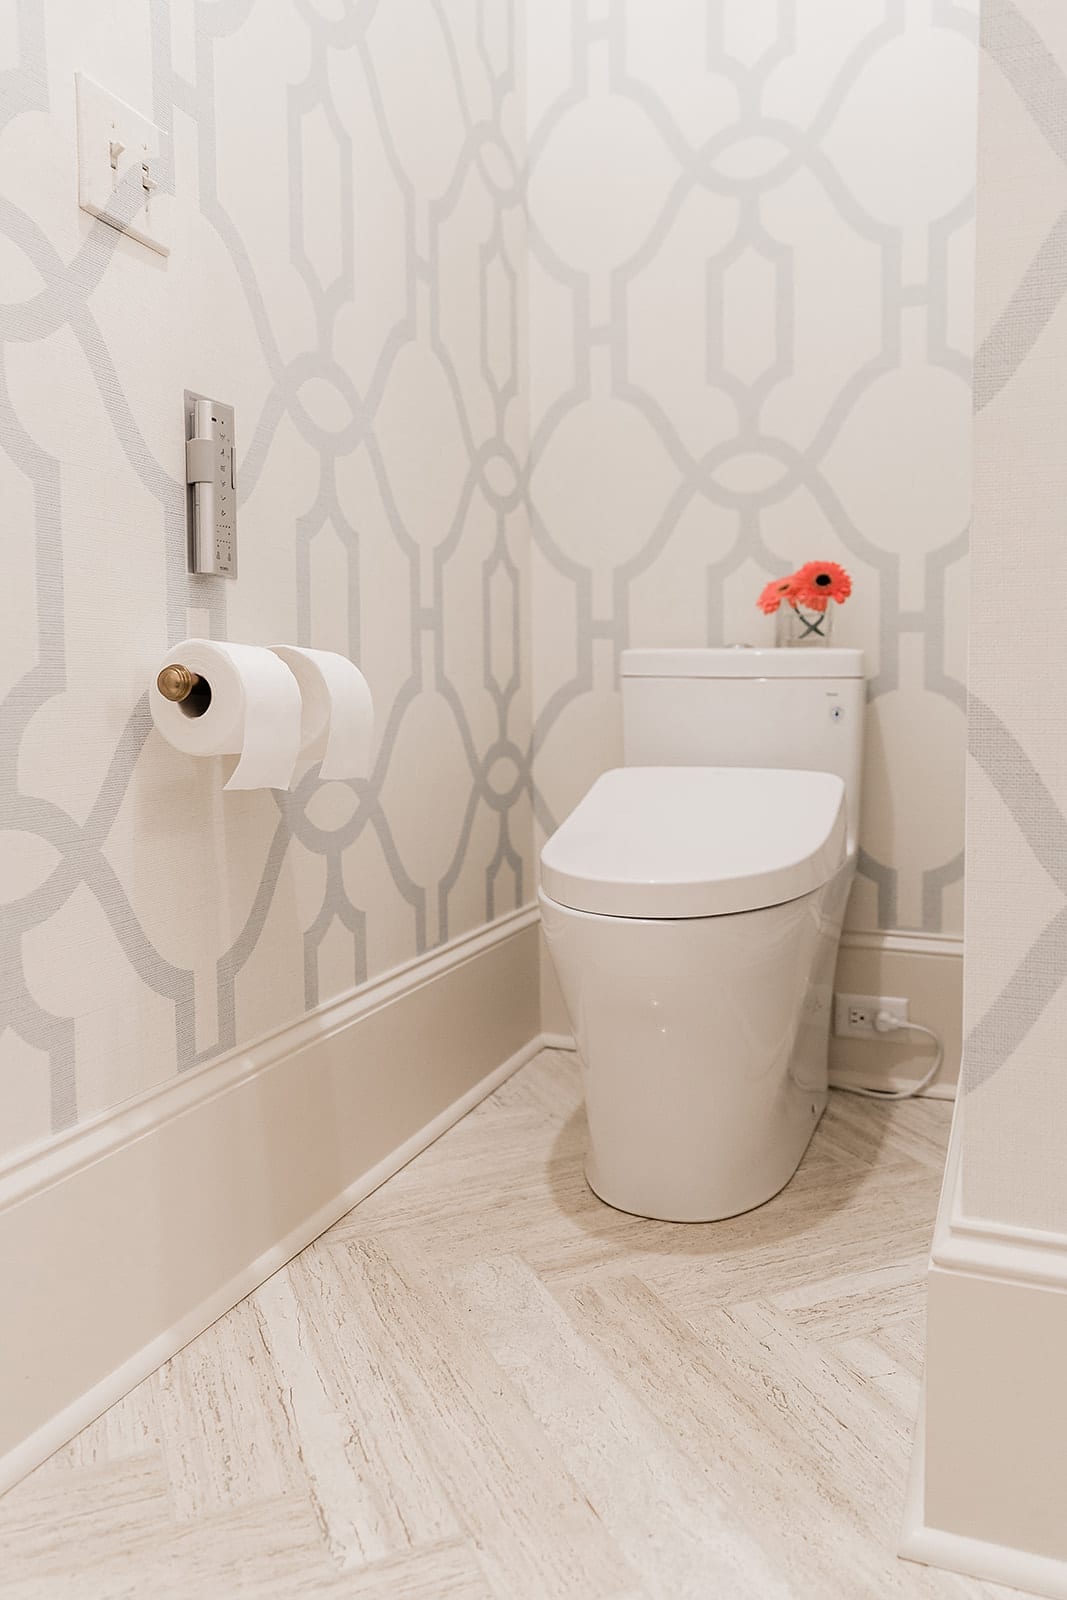 Be “TOTO-ly” clean! We put in a TOTO Aquia IV WASHLET+ S550e in both our powder bathroom, and our daughter’s bathroom. Why? Because life w/ 3 busy kids make these bathroom areas, ahem, well-loved! Kids can rush through hand washing. This WASHLET+ model provides auto-open/close lid and auto-flush! No hands touching anything! Plus, I feel better knowing my little people get properly clean thanks to the bidet “services” of WASHLET 😉 Head to my website for all the details so you can get “TOTO-ly” clean, too!